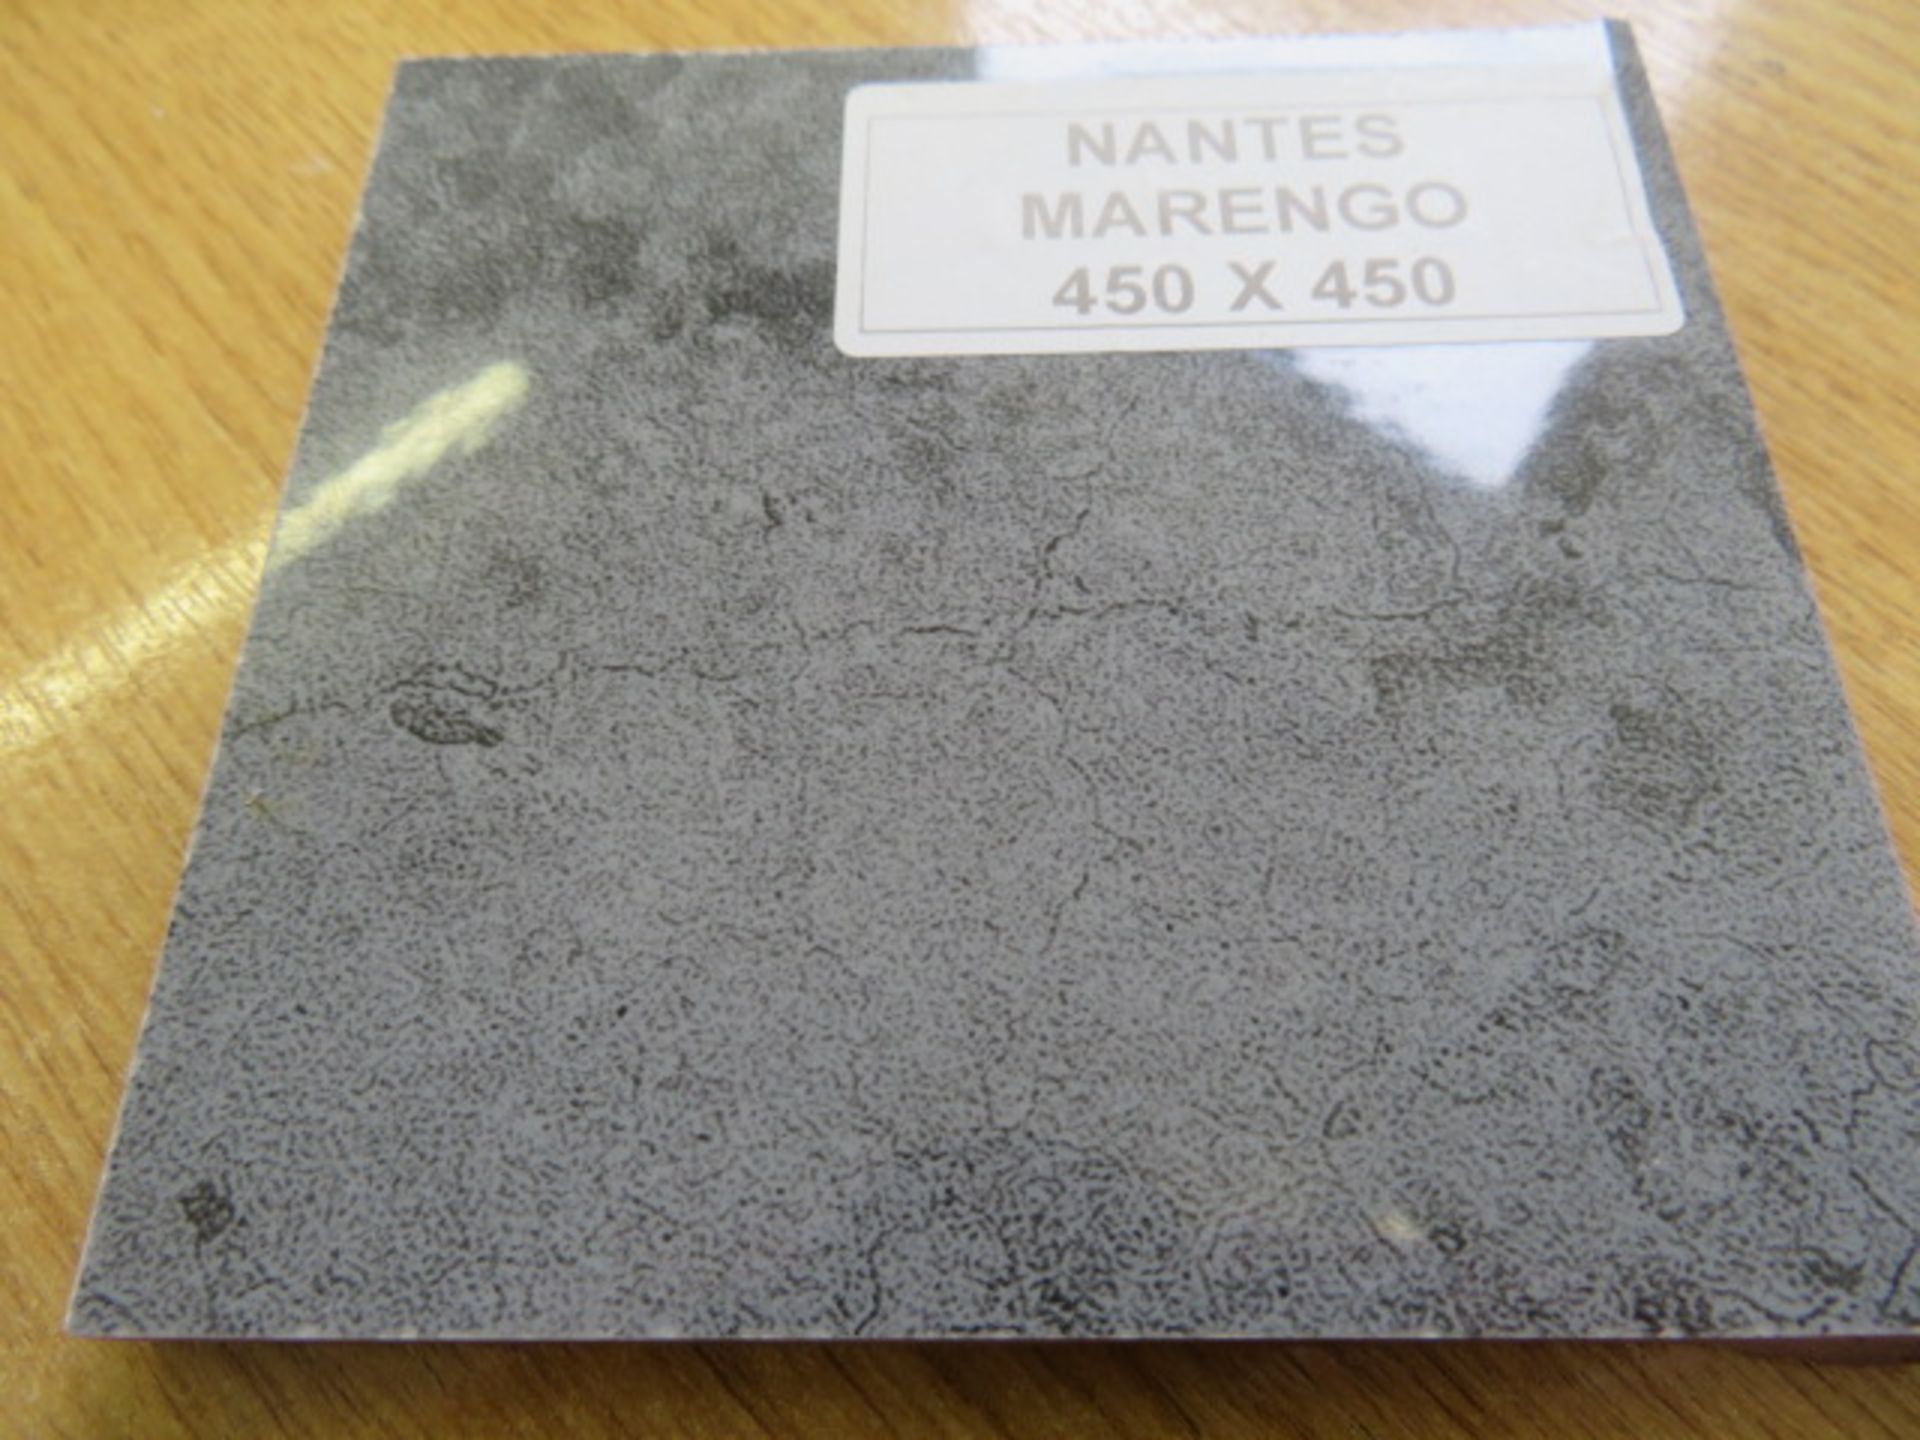 NEW 8.52 Square Meters of Nantes Marengo Wall and Floor Tiles. 450x450mm per tile, 8mm thick. ... - Image 3 of 3